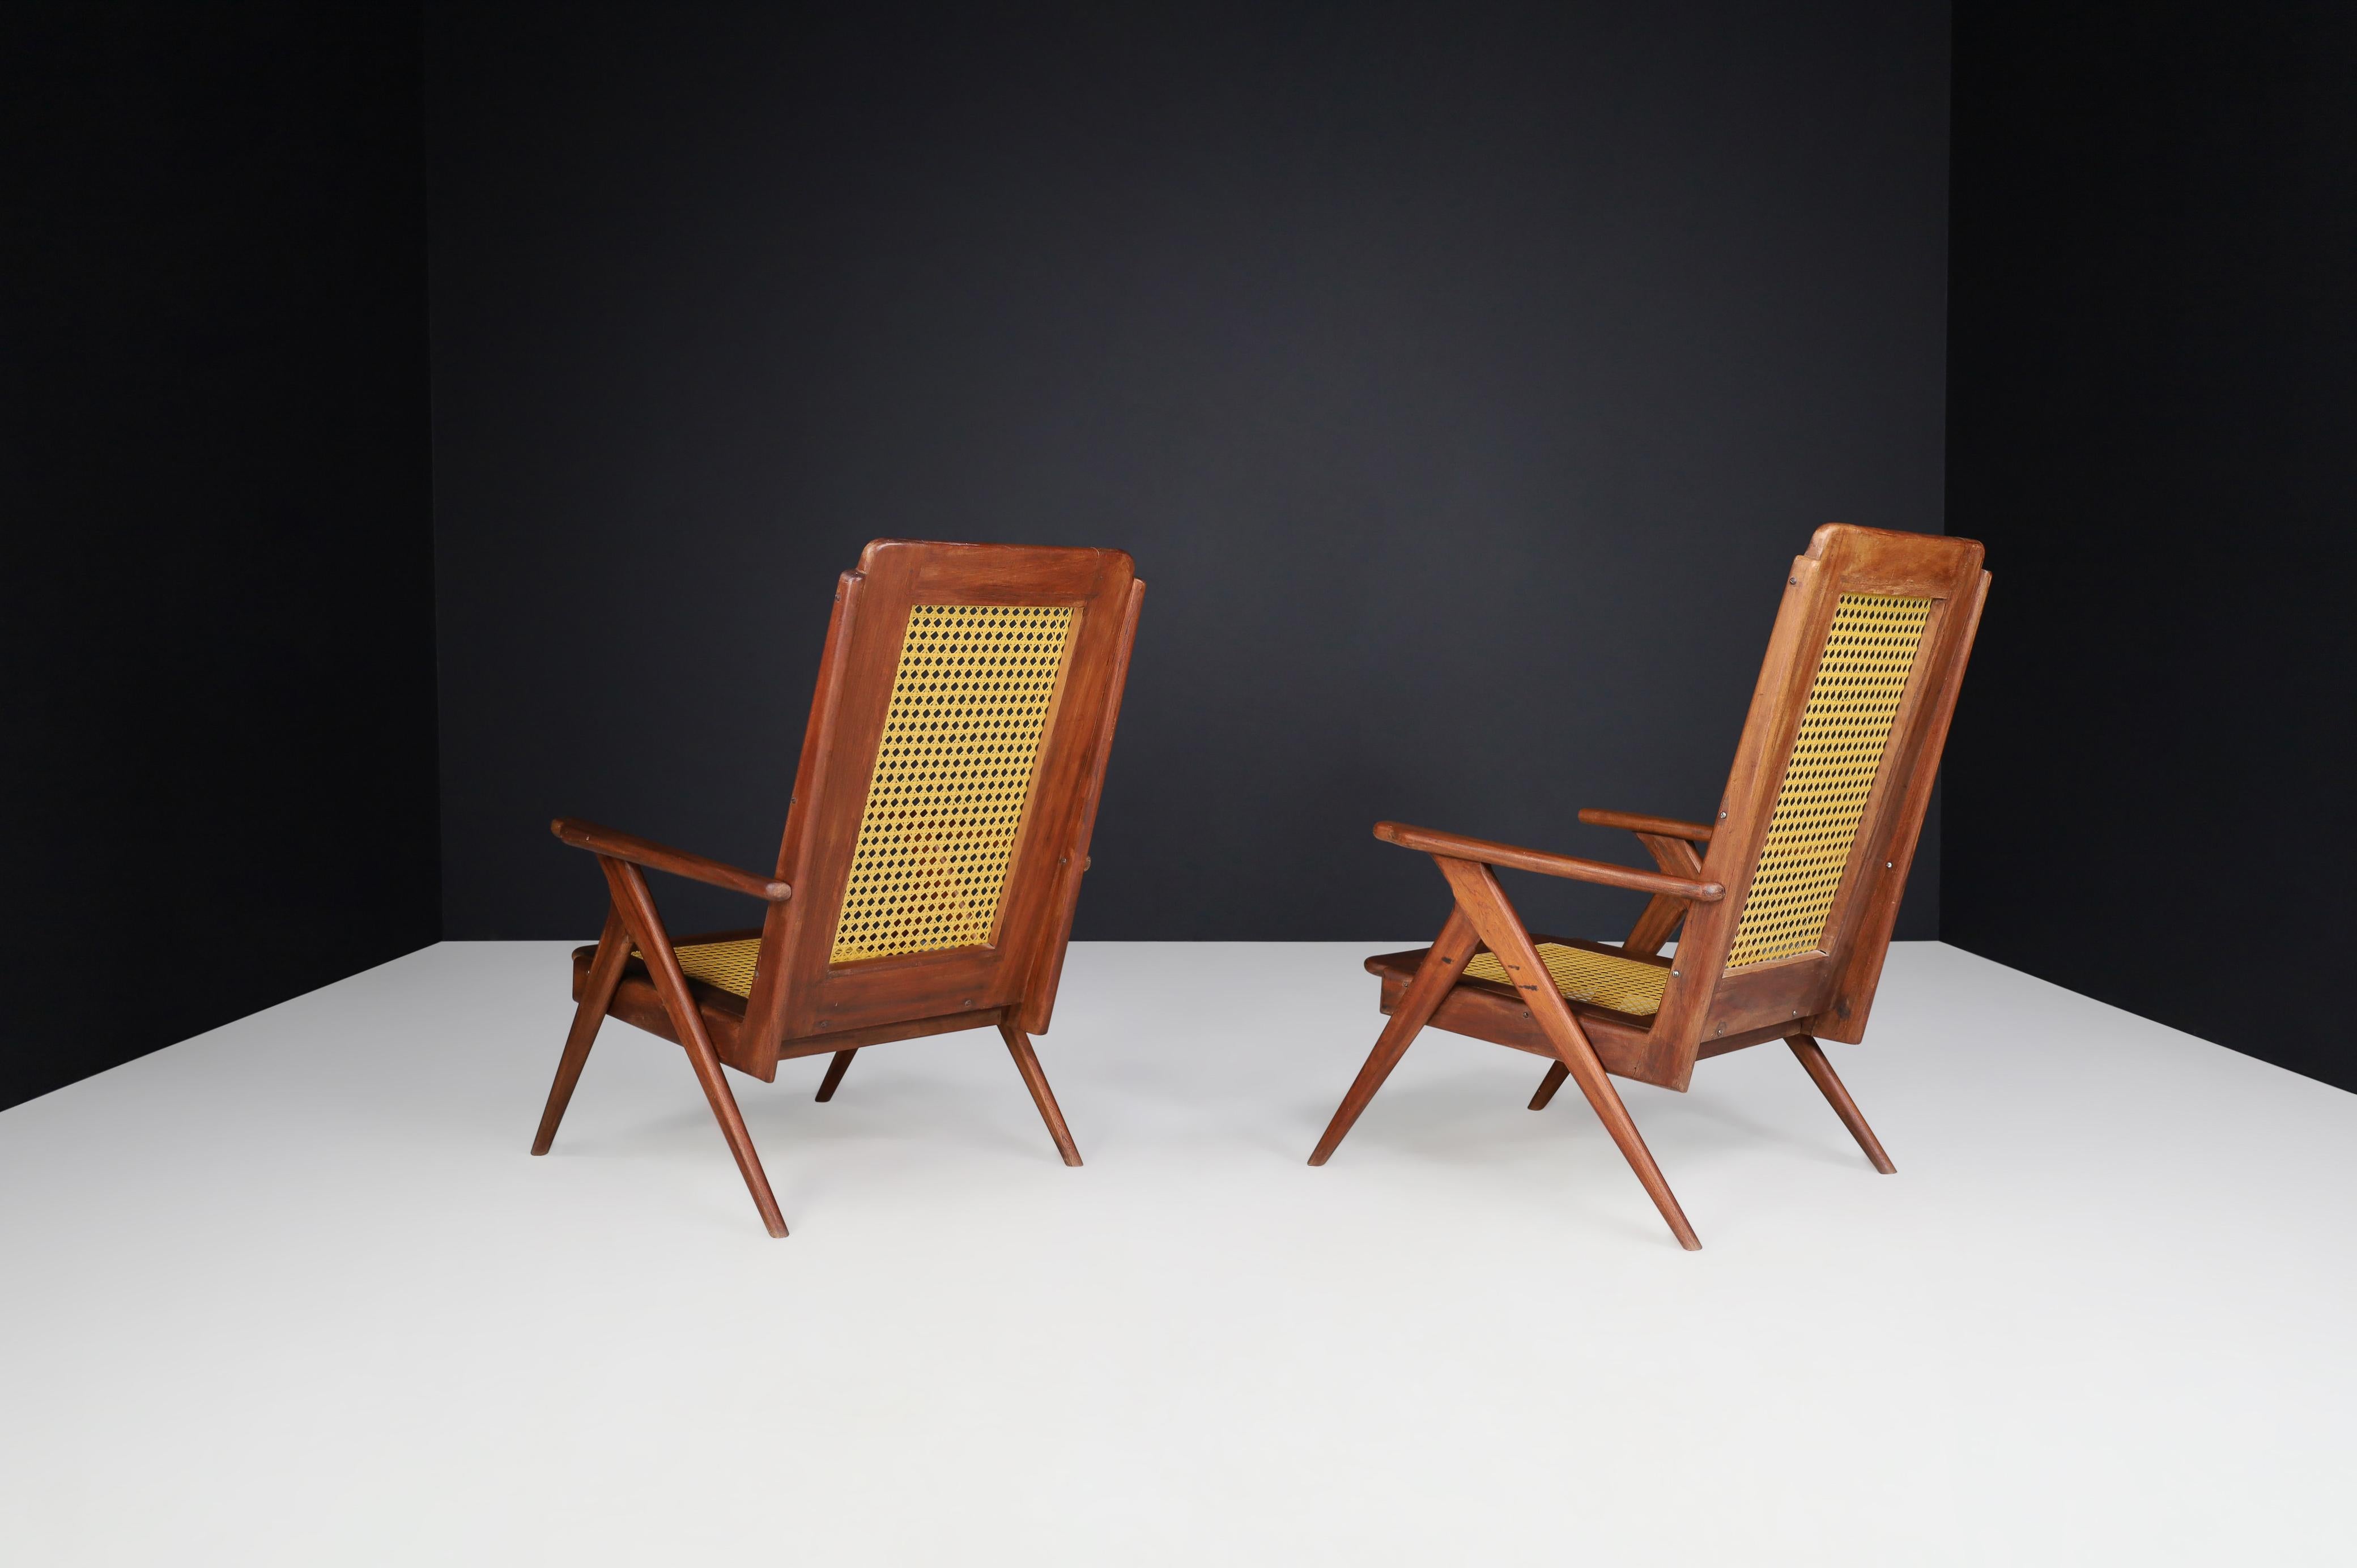 Lounge Chairs with Mahogany structure and Webbing, France 1950s For Sale 8